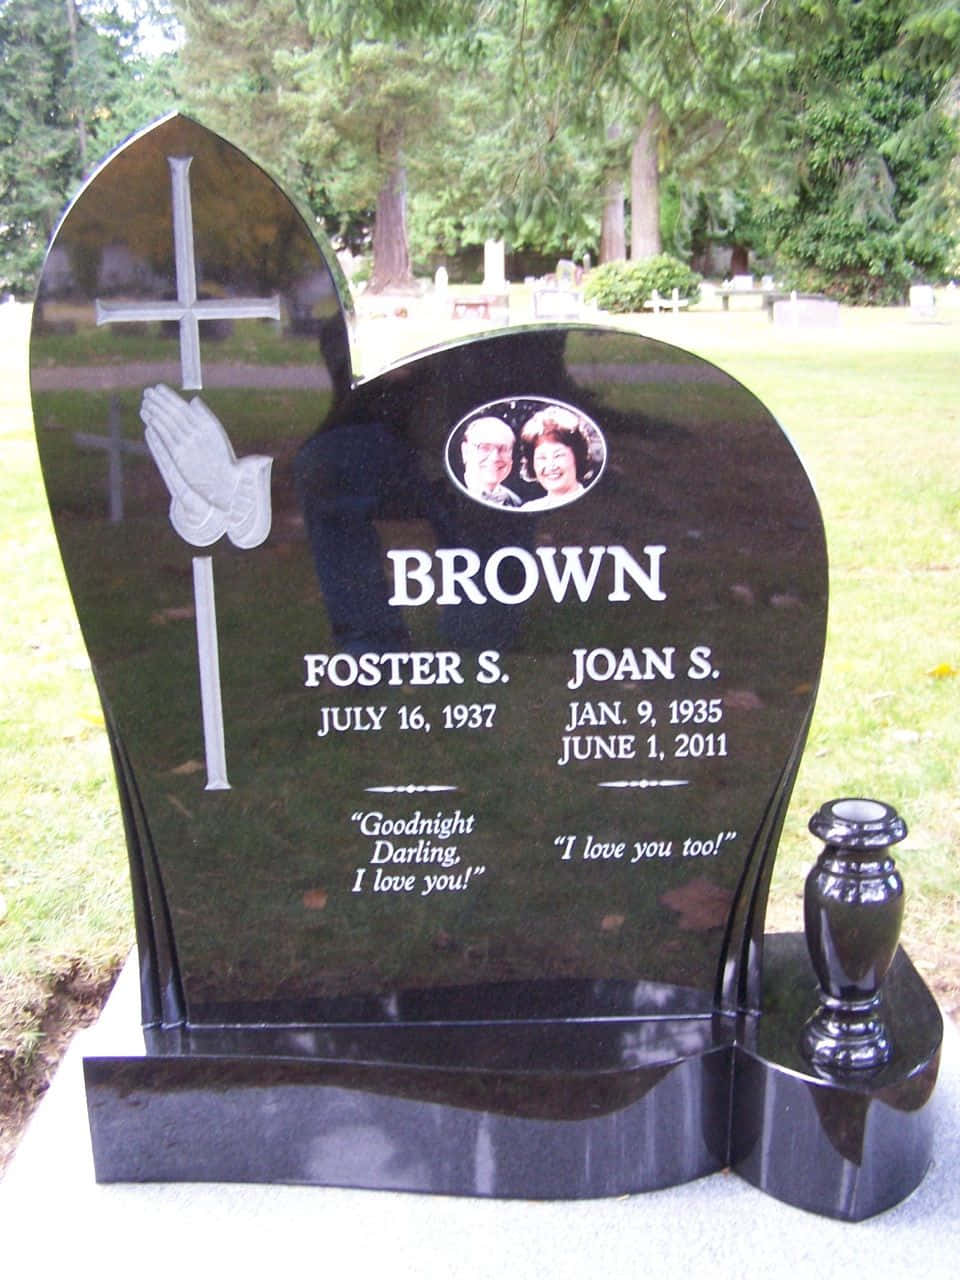 A Gravestone With The Name Brown And A Cross